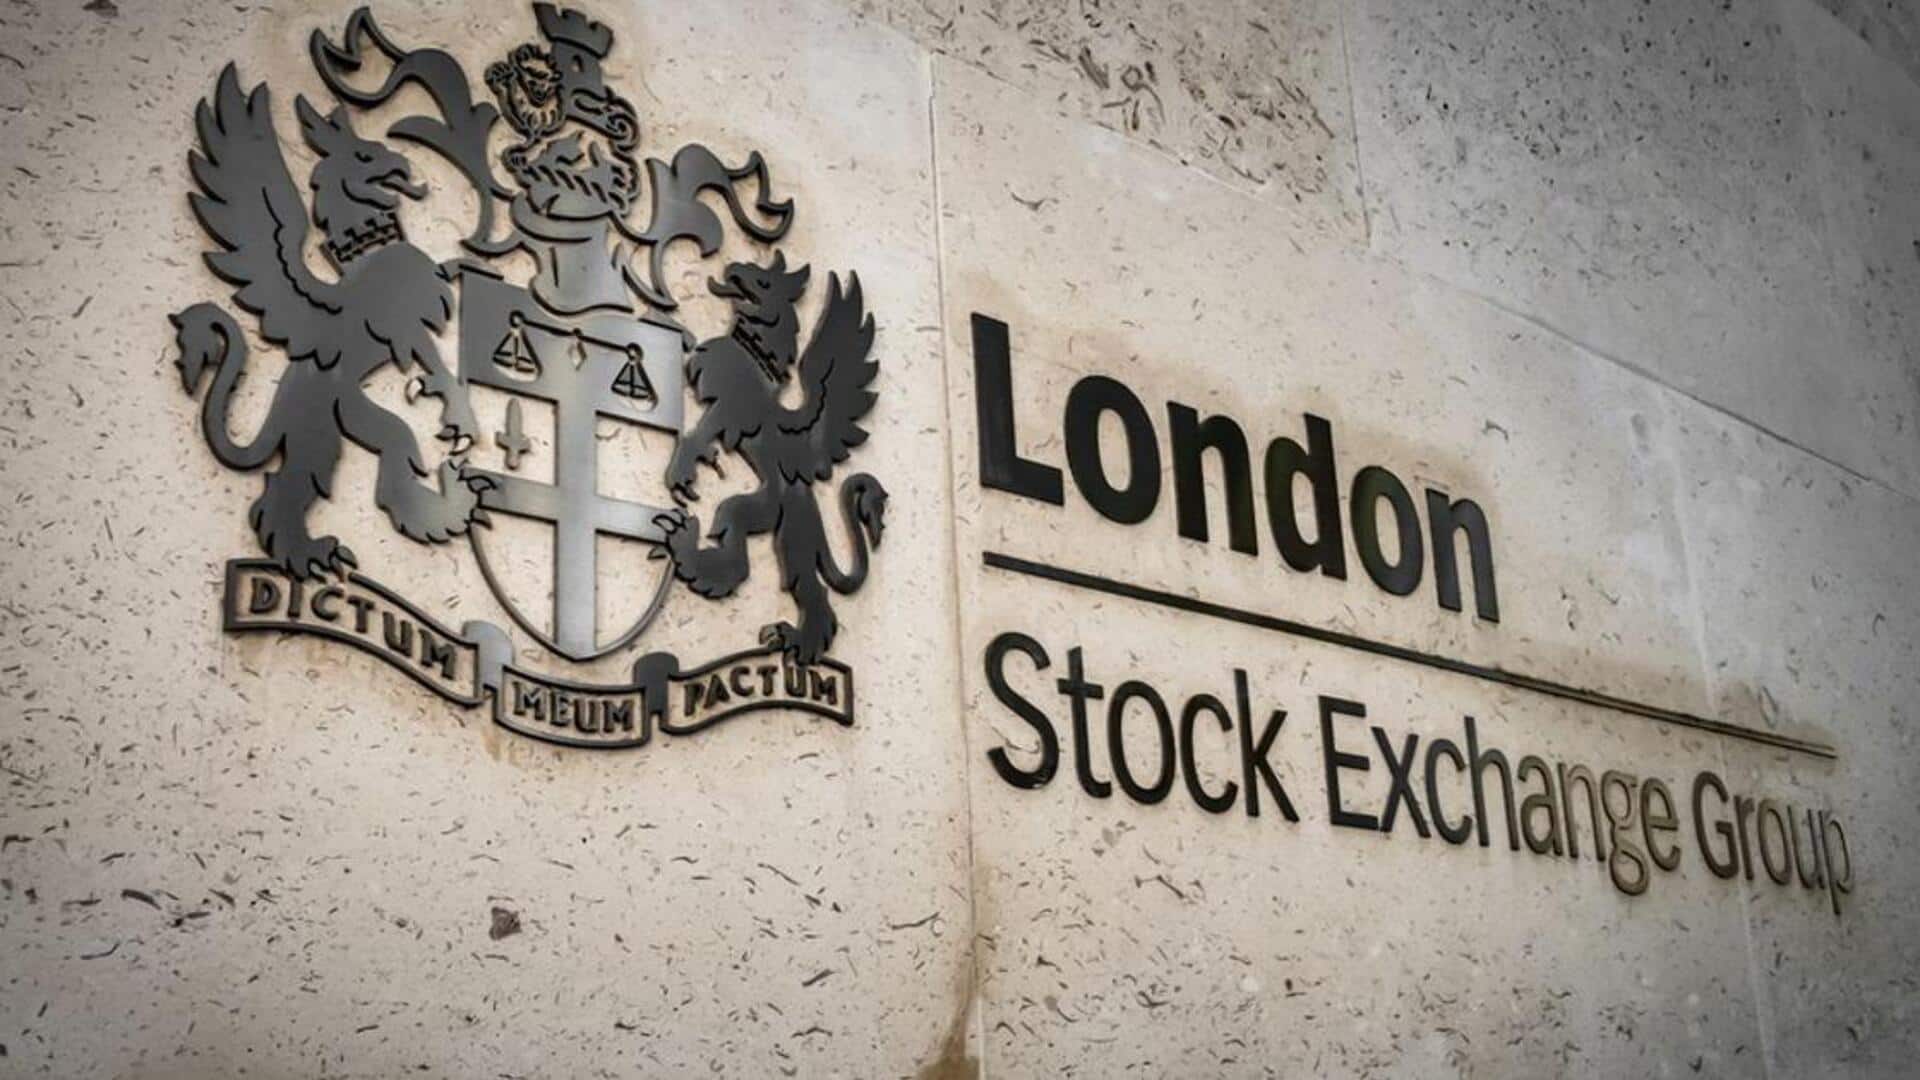 How these Pro-Palestine activists planned to disrupt London Stock Exchange